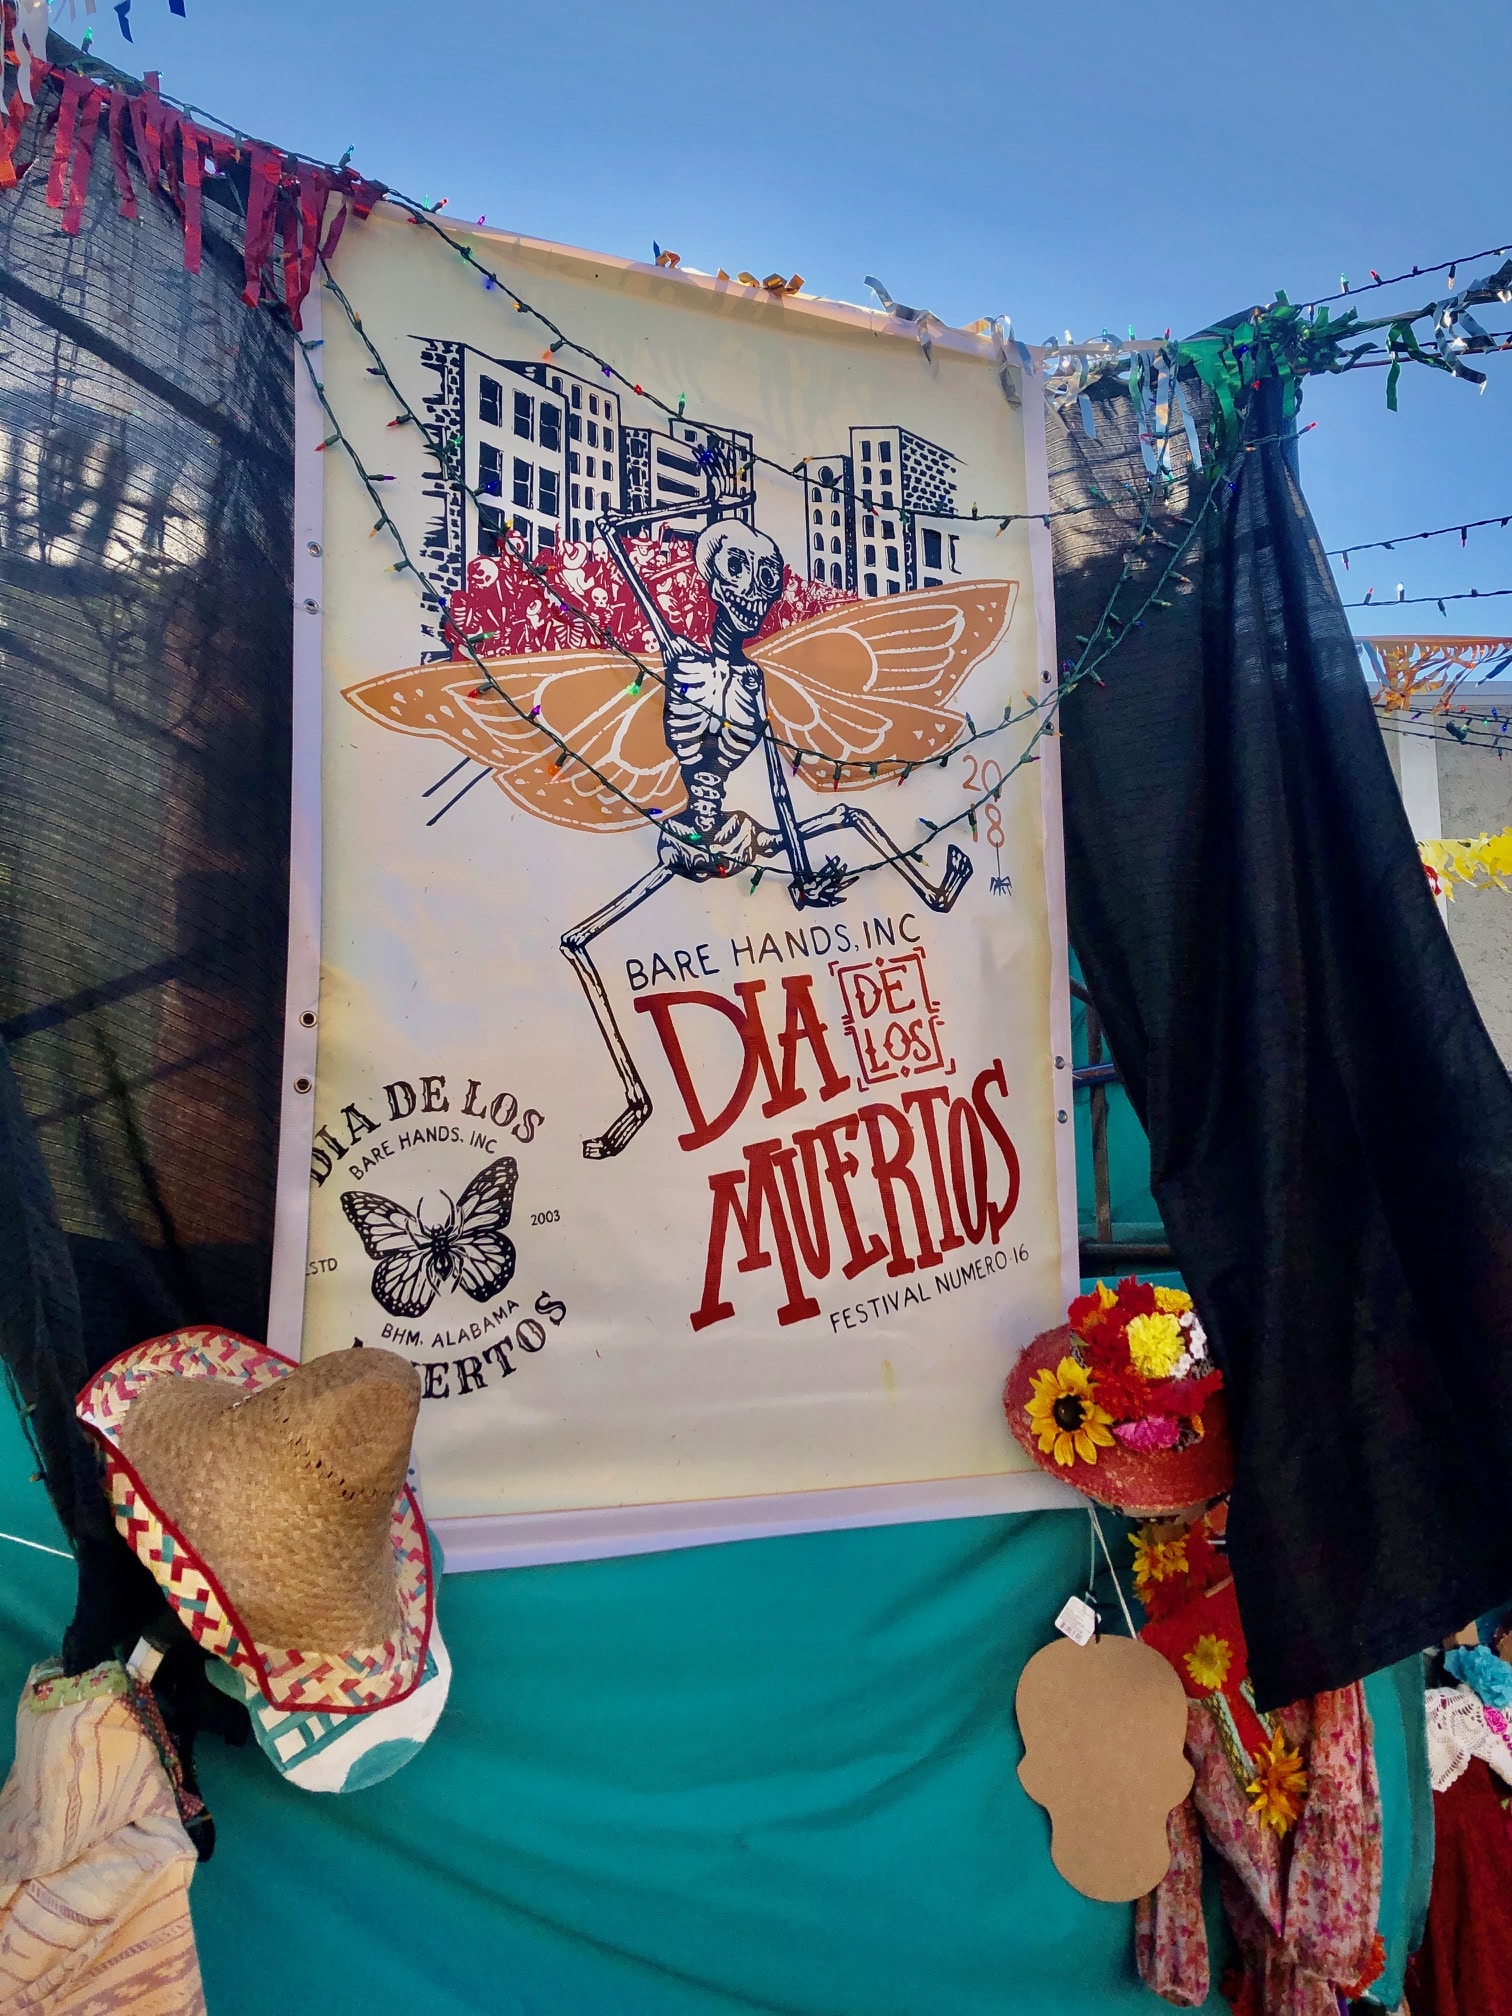 Day of the Day 1 Discover amazing altars + more during Dia de los Muertos, Nov. 2-7 at Pepper Place